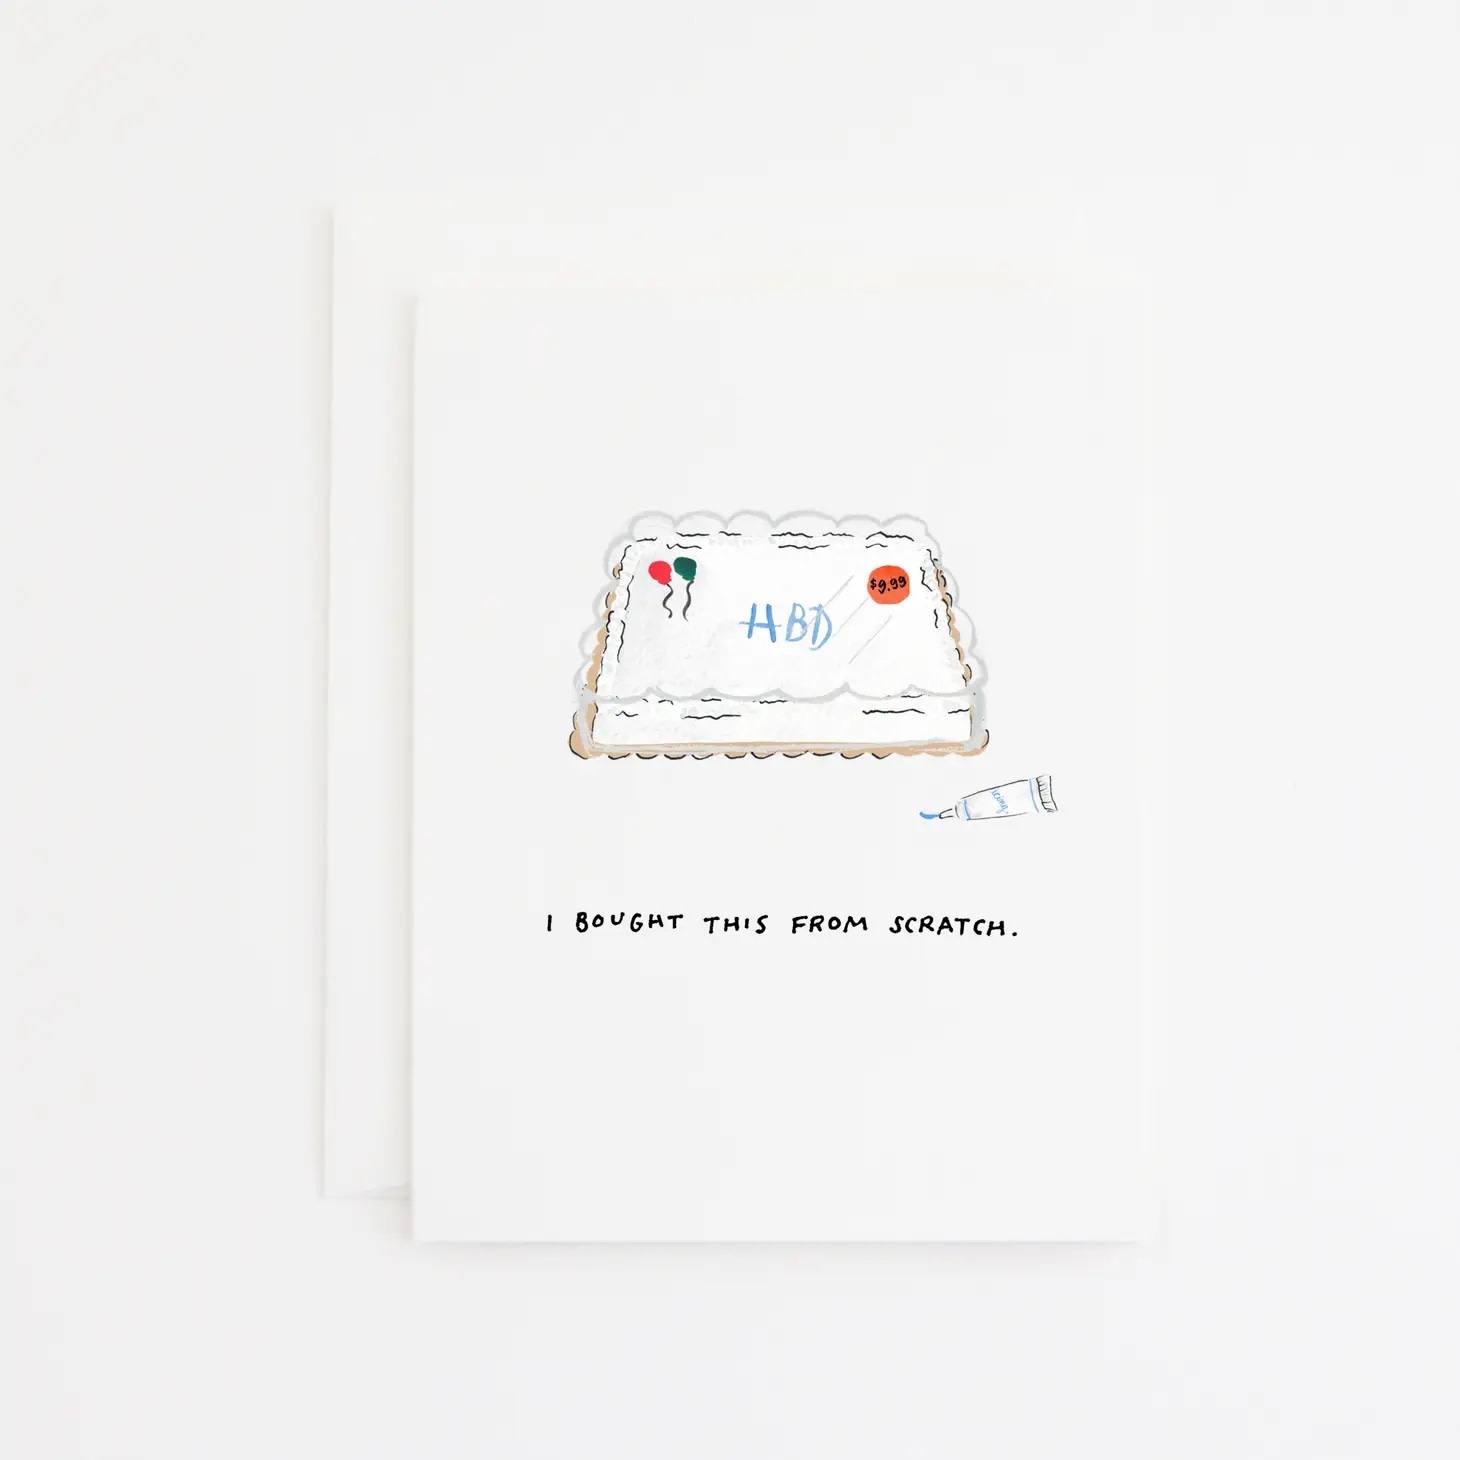 Party Sally - PSA Store Bought Cake Birthday Card